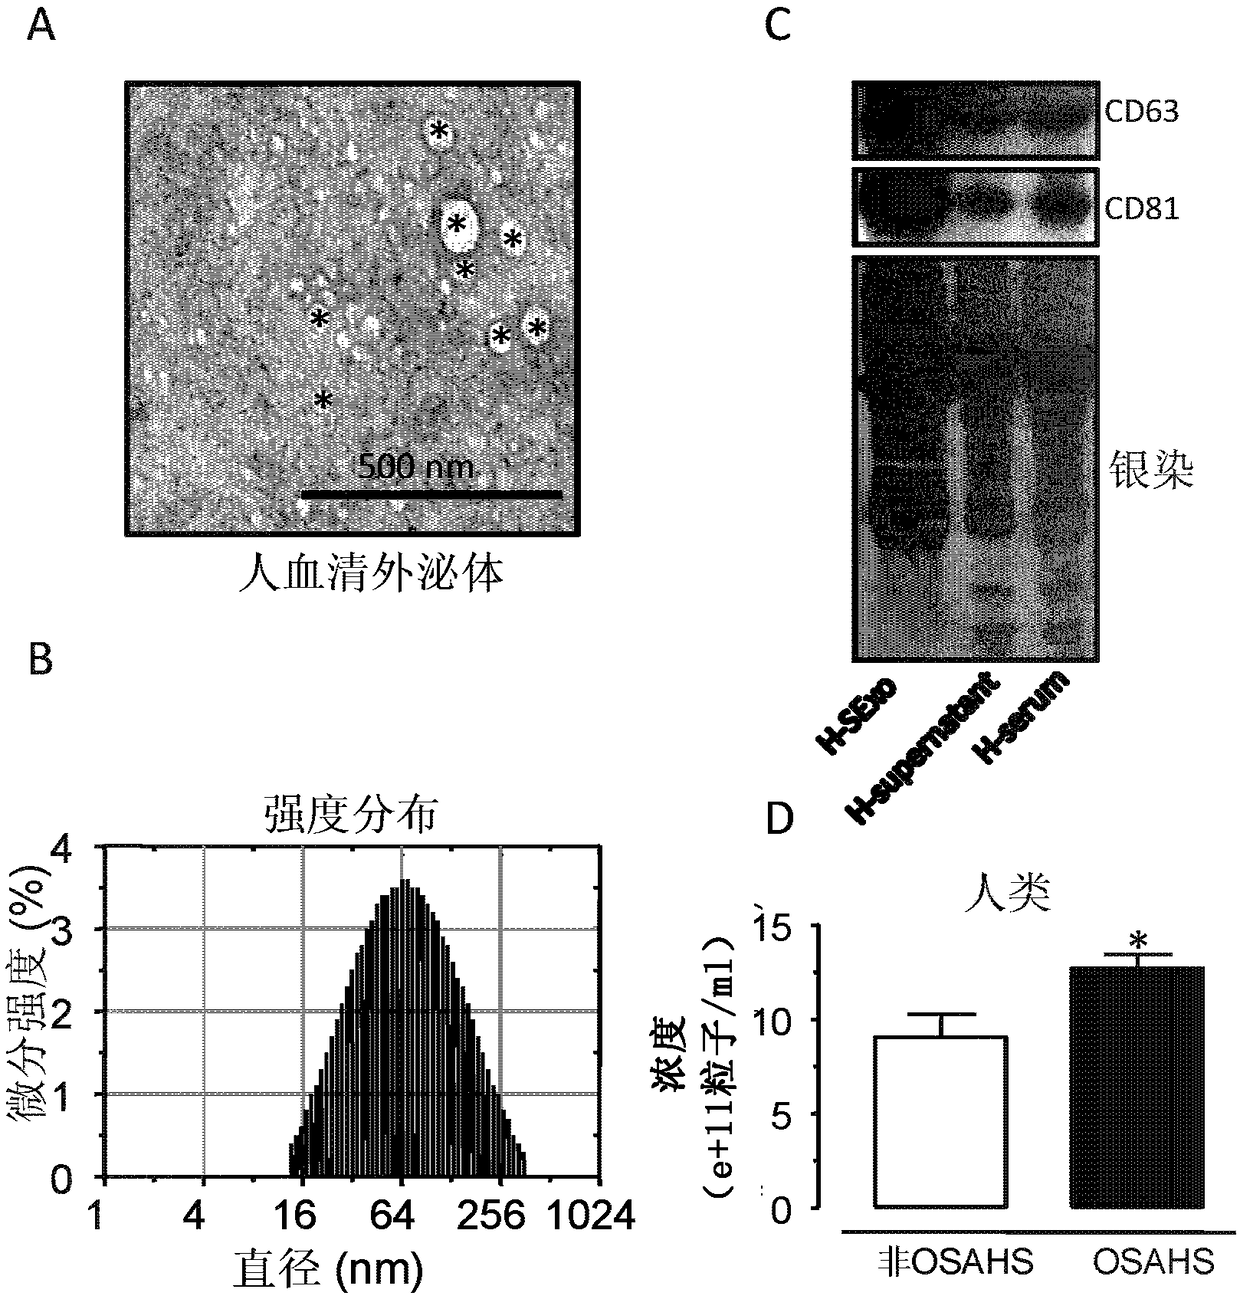 Serum exosome protein marker for obstructive sleep apnea-hypopnea syndrome and application thereof